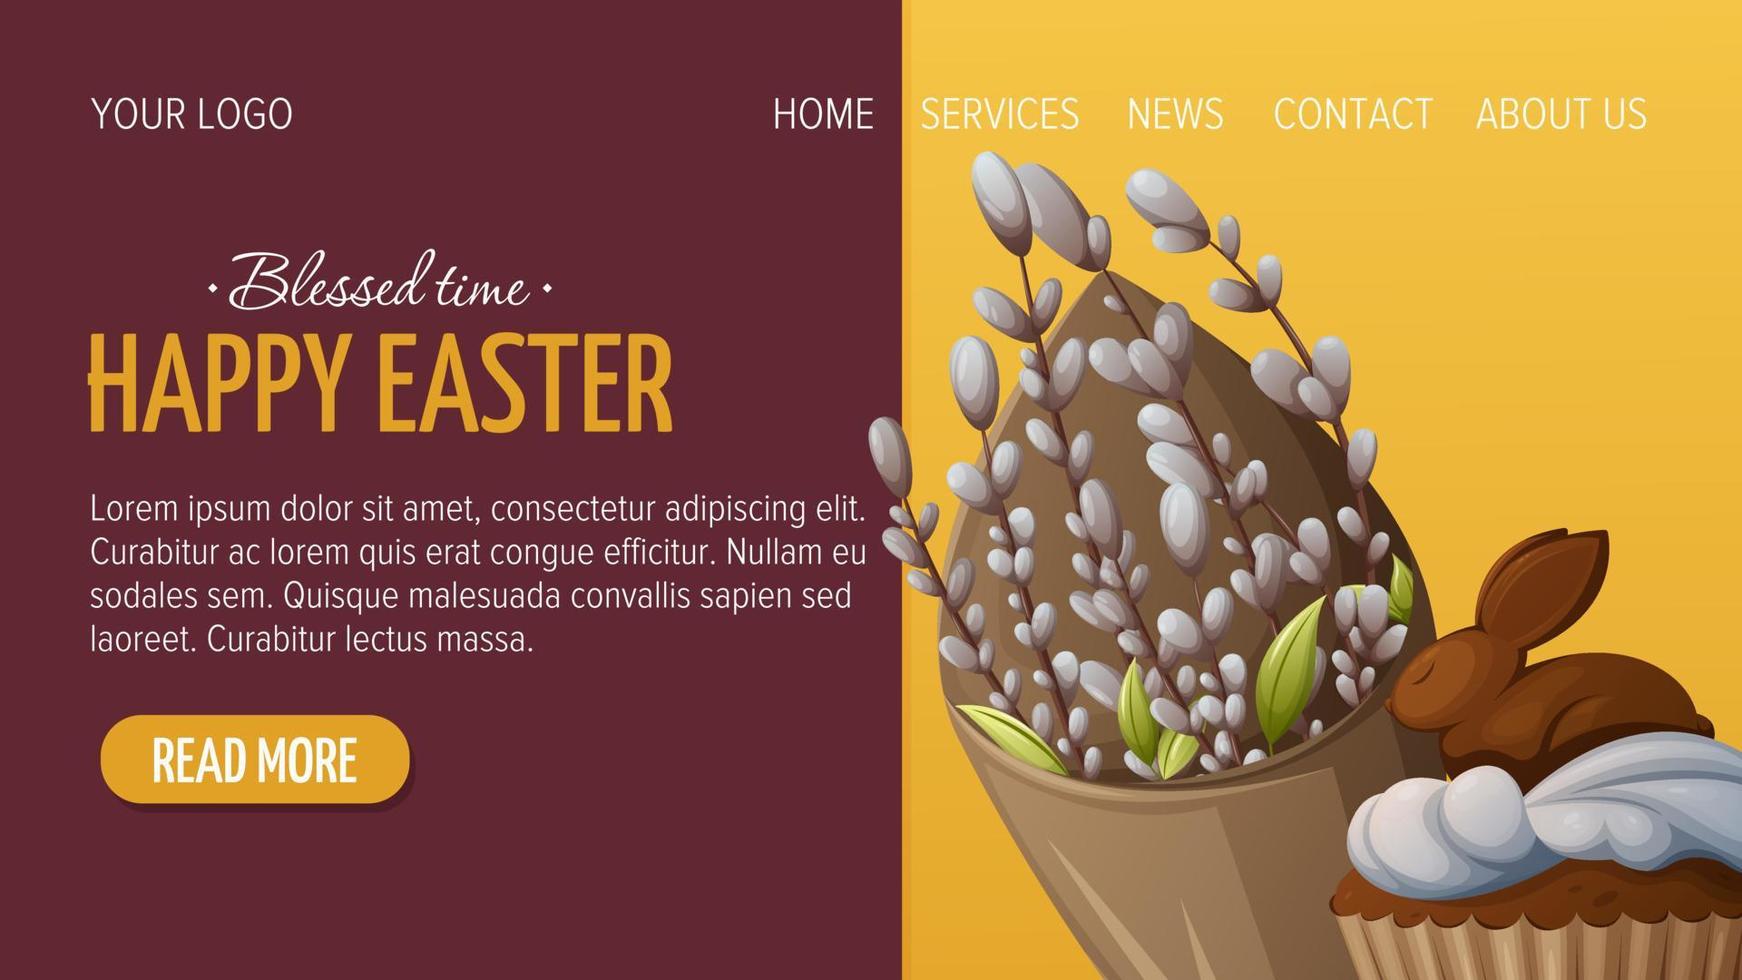 Web page design for Happy Easter. A bouquet of willow branches and a cupcake with a chocolate bunny. Vector illustration, template for poster, banner, website.